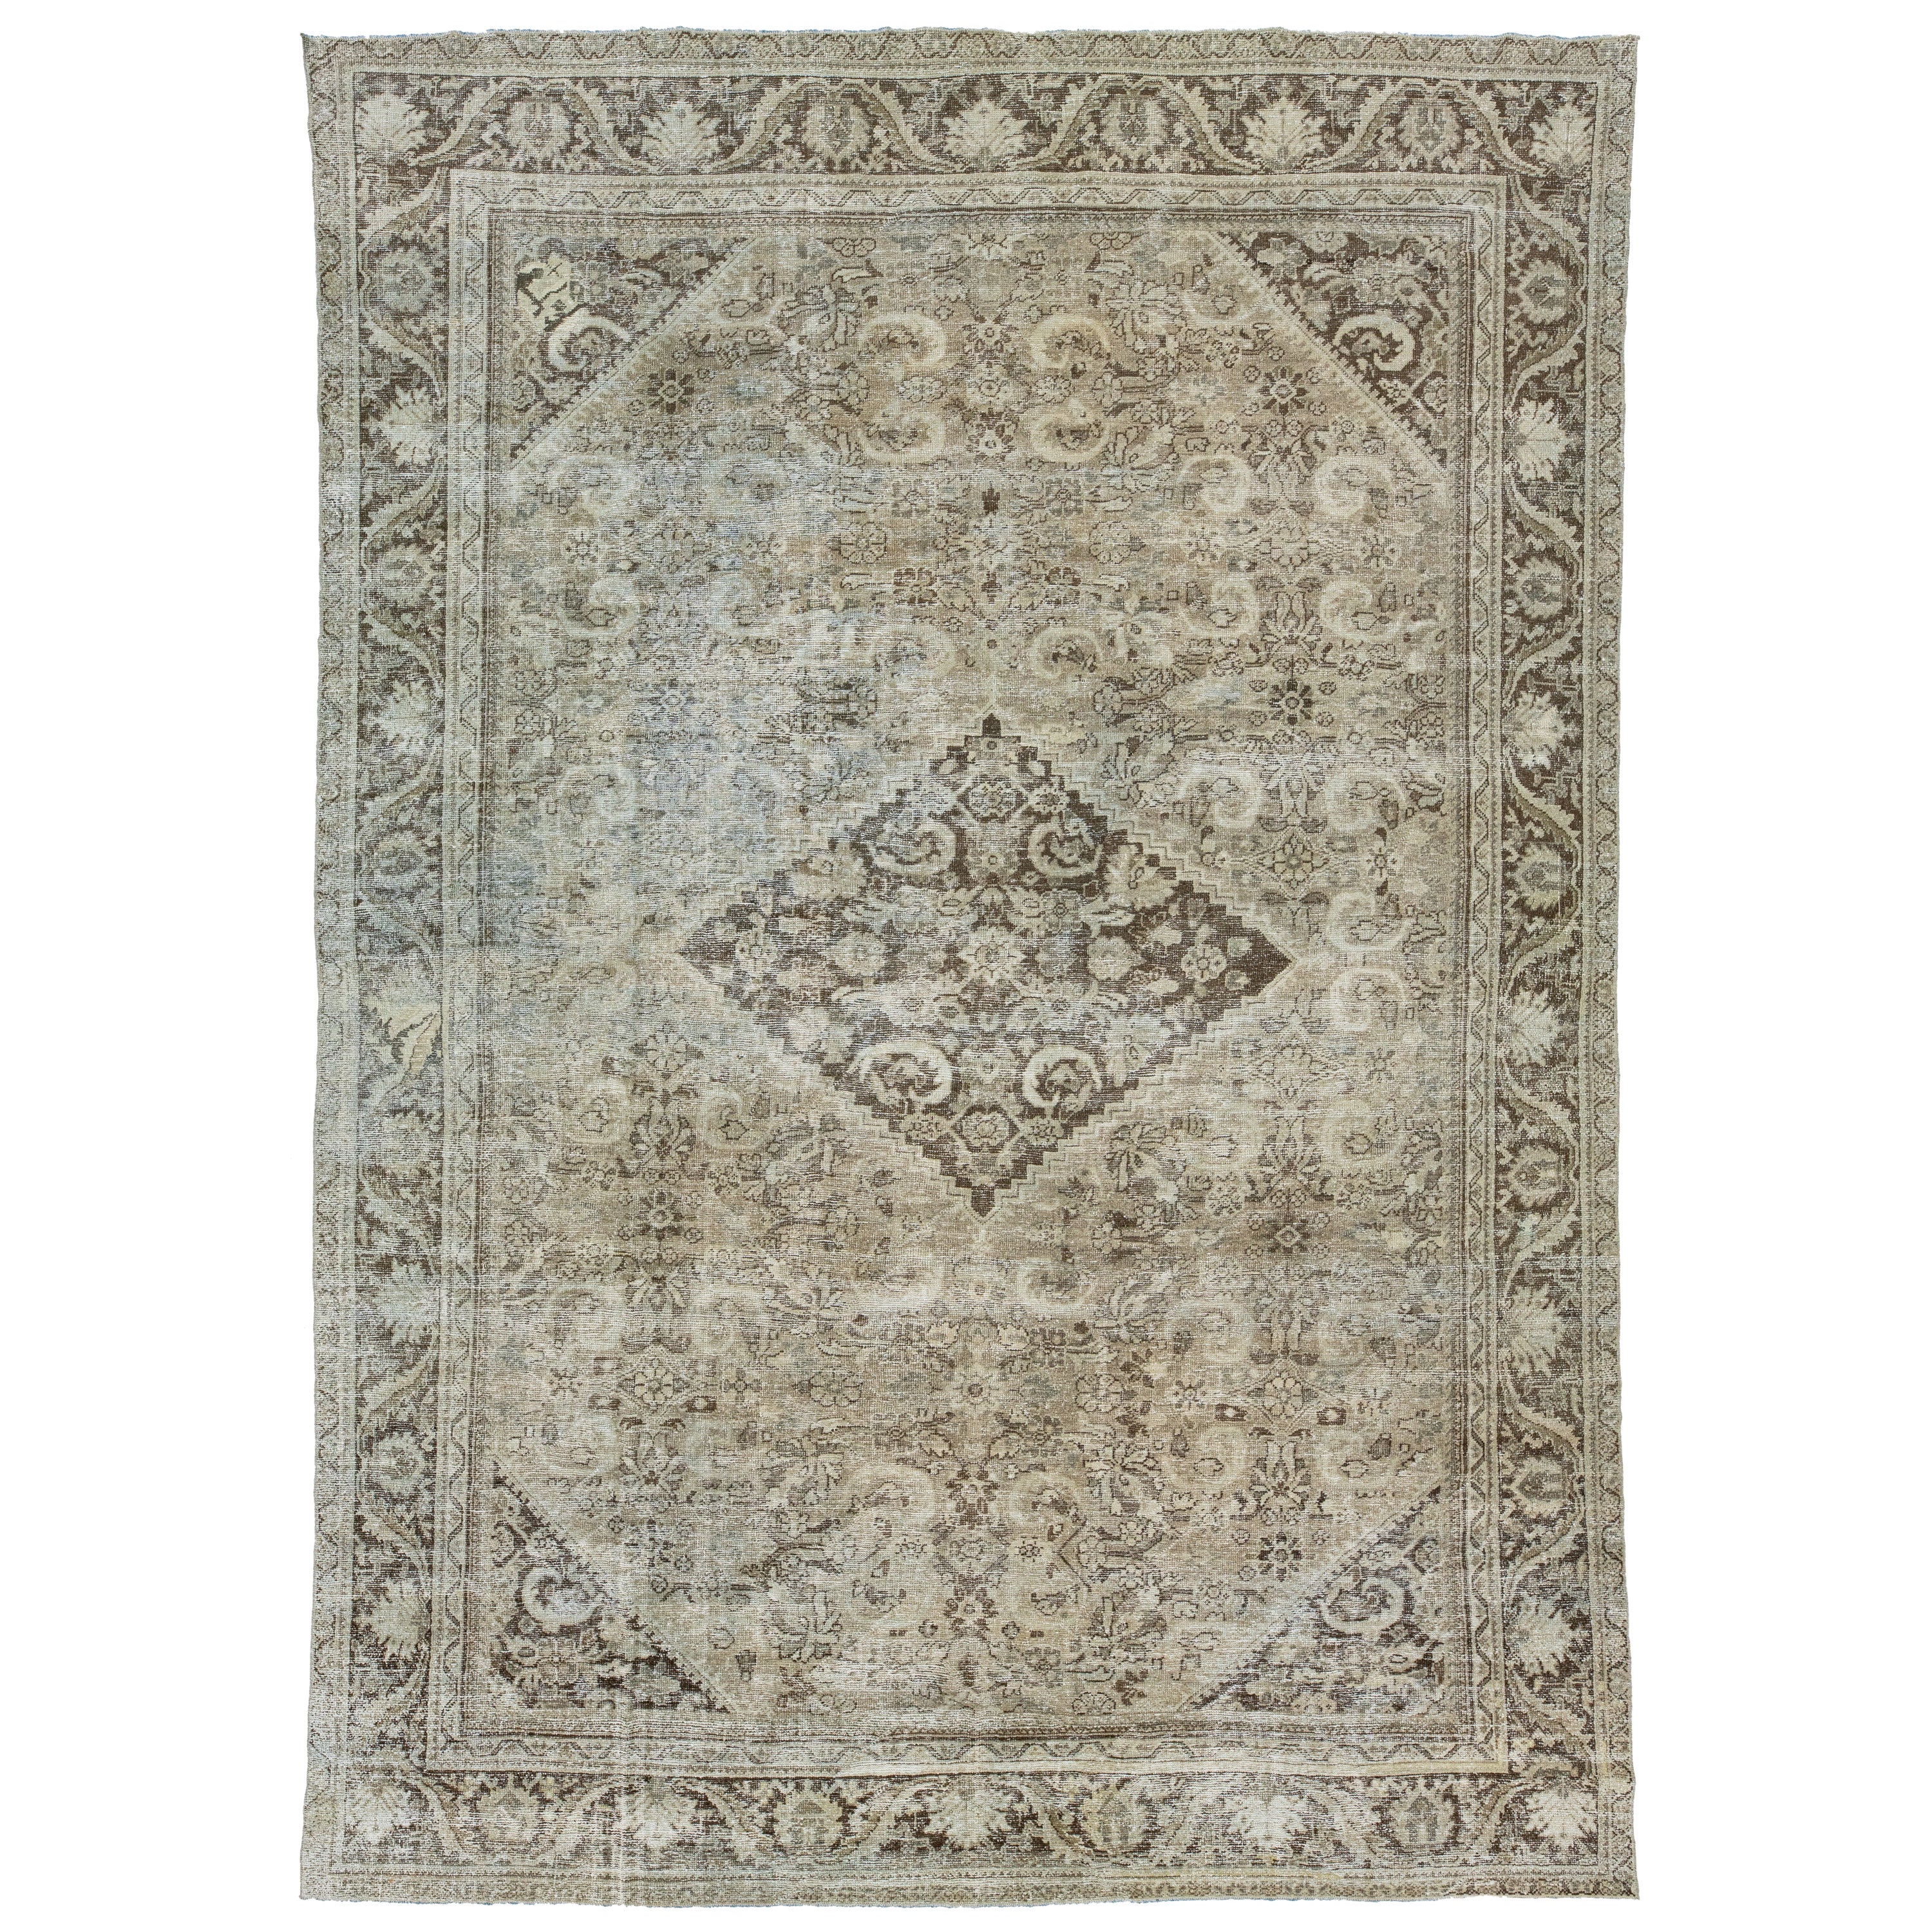 Brown Antique Persian Mahal Wool Rug With Allover Pattern From The 1900s